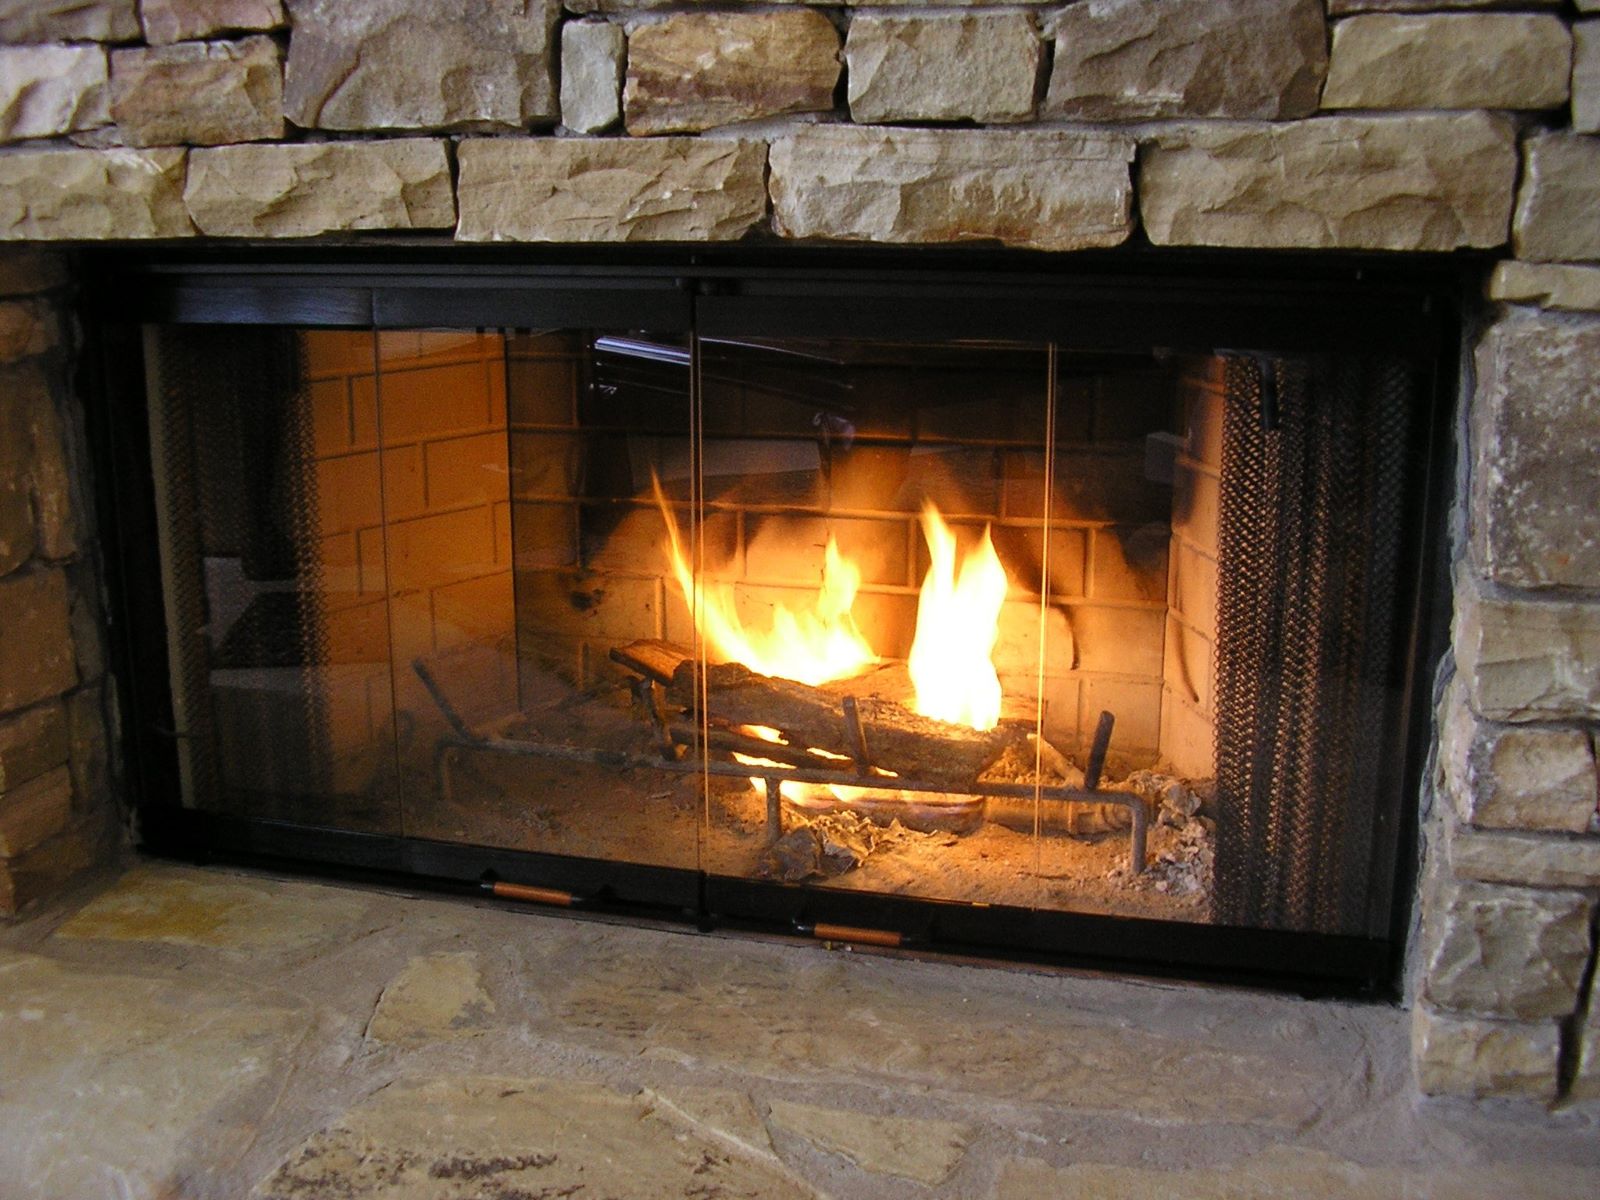 How To Install Fireplace Doors With Glass